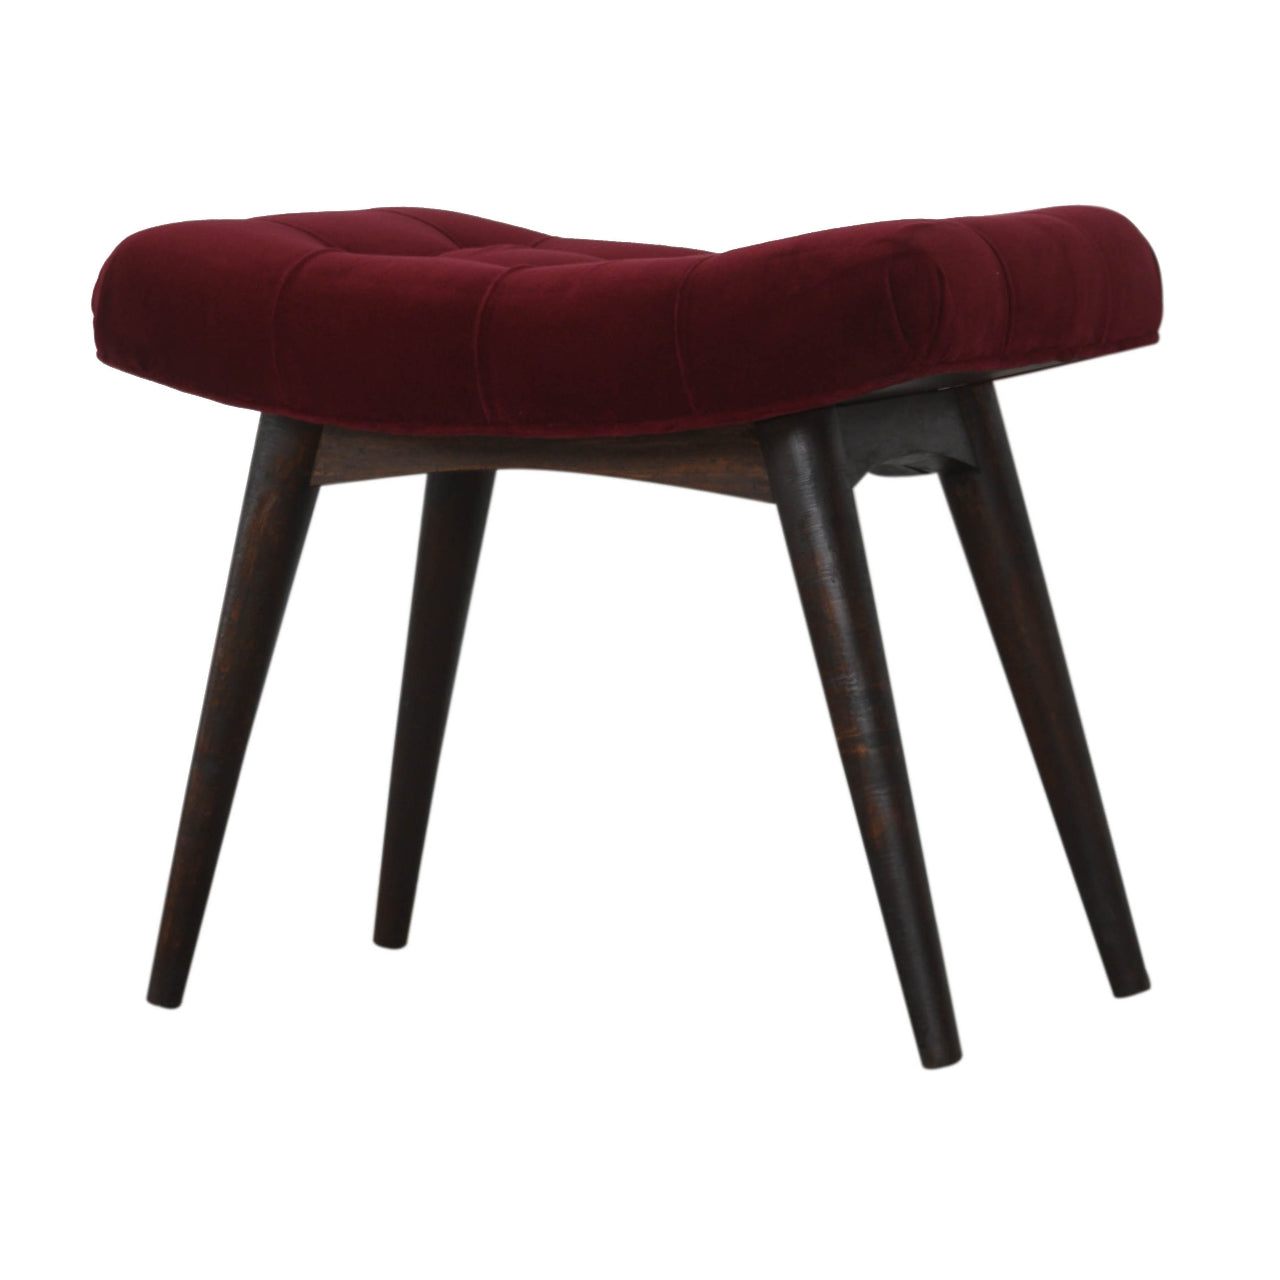 Solid Wood Wine Red Cotton Velvet Curved Bench